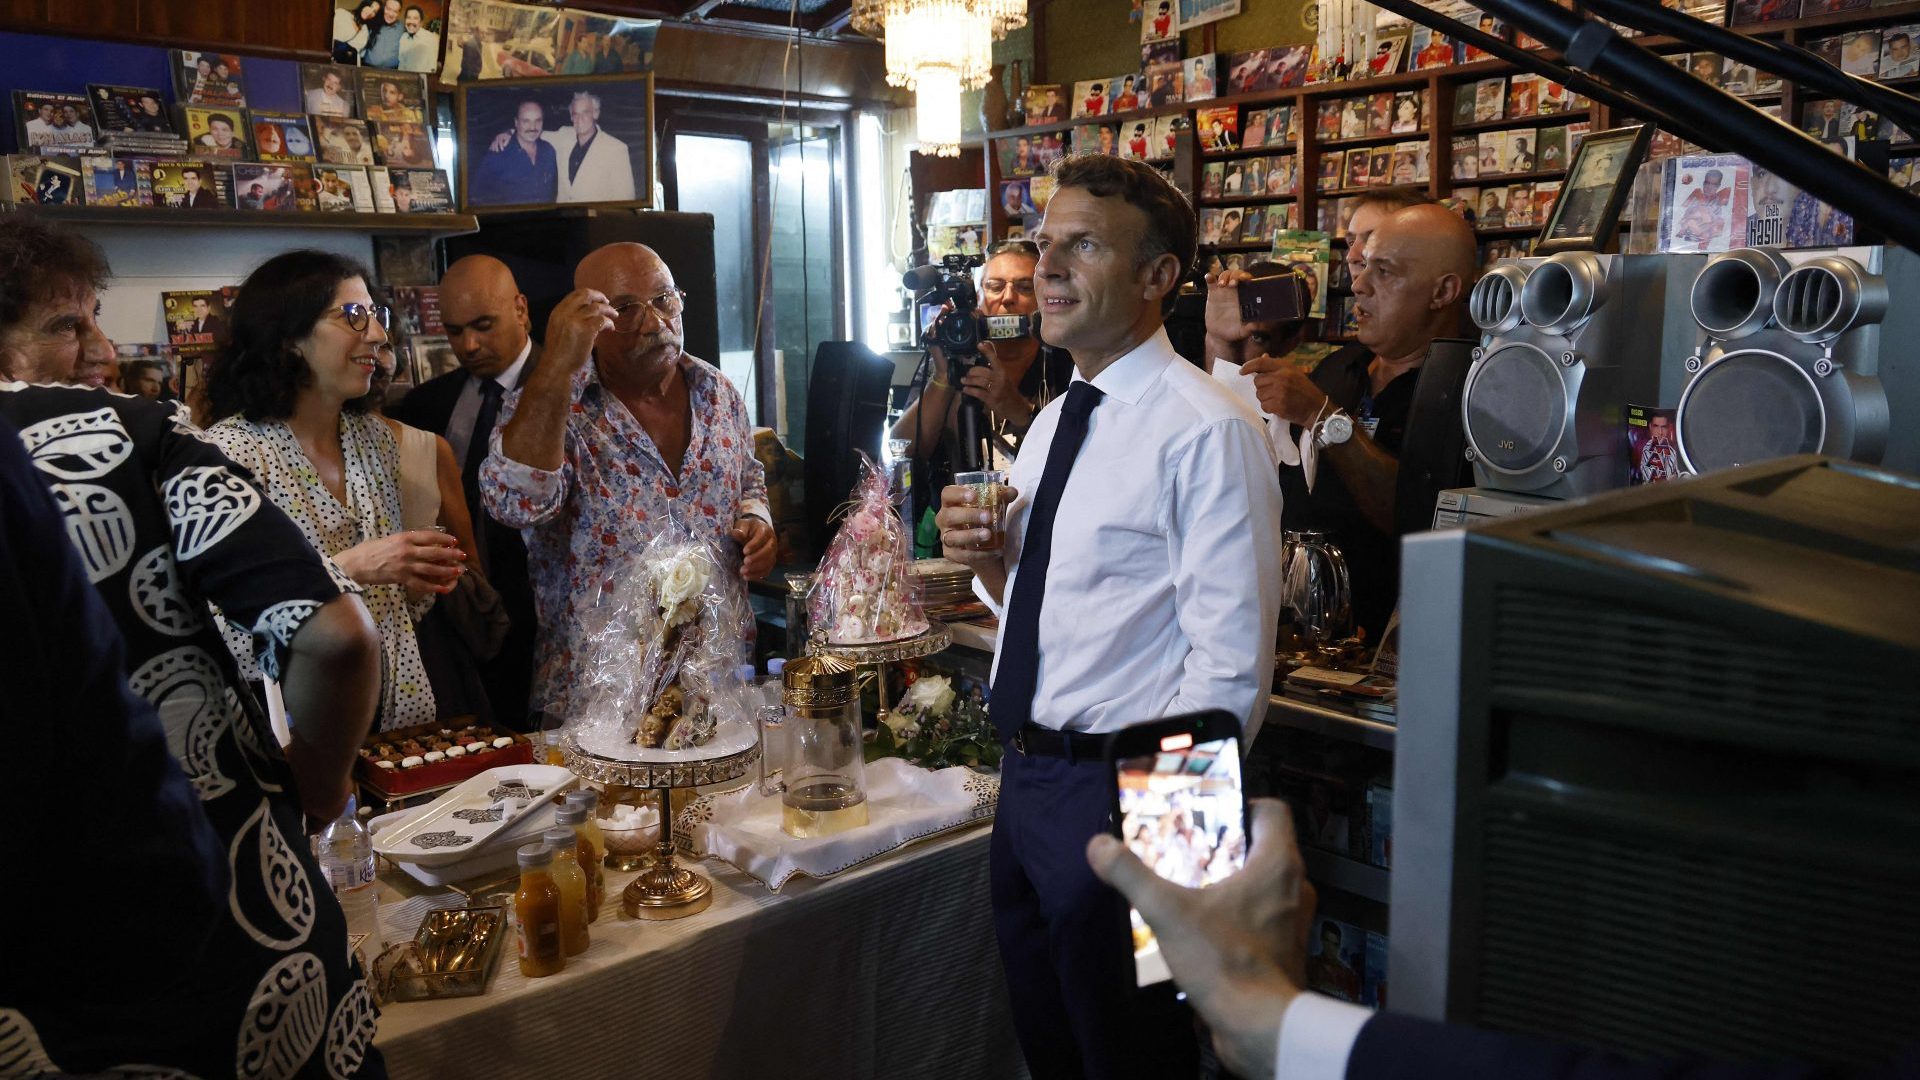 France's President Emmanuel Macron looks on during his visit at the disco Maghreb Shopin, the mythical label of rai music, next to its owner, Boualem Benhaoua and France's former minister and Arab World Institute President Jack Lang in Oran in August (Photo by LUDOVIC MARIN/AFP via Getty Images)